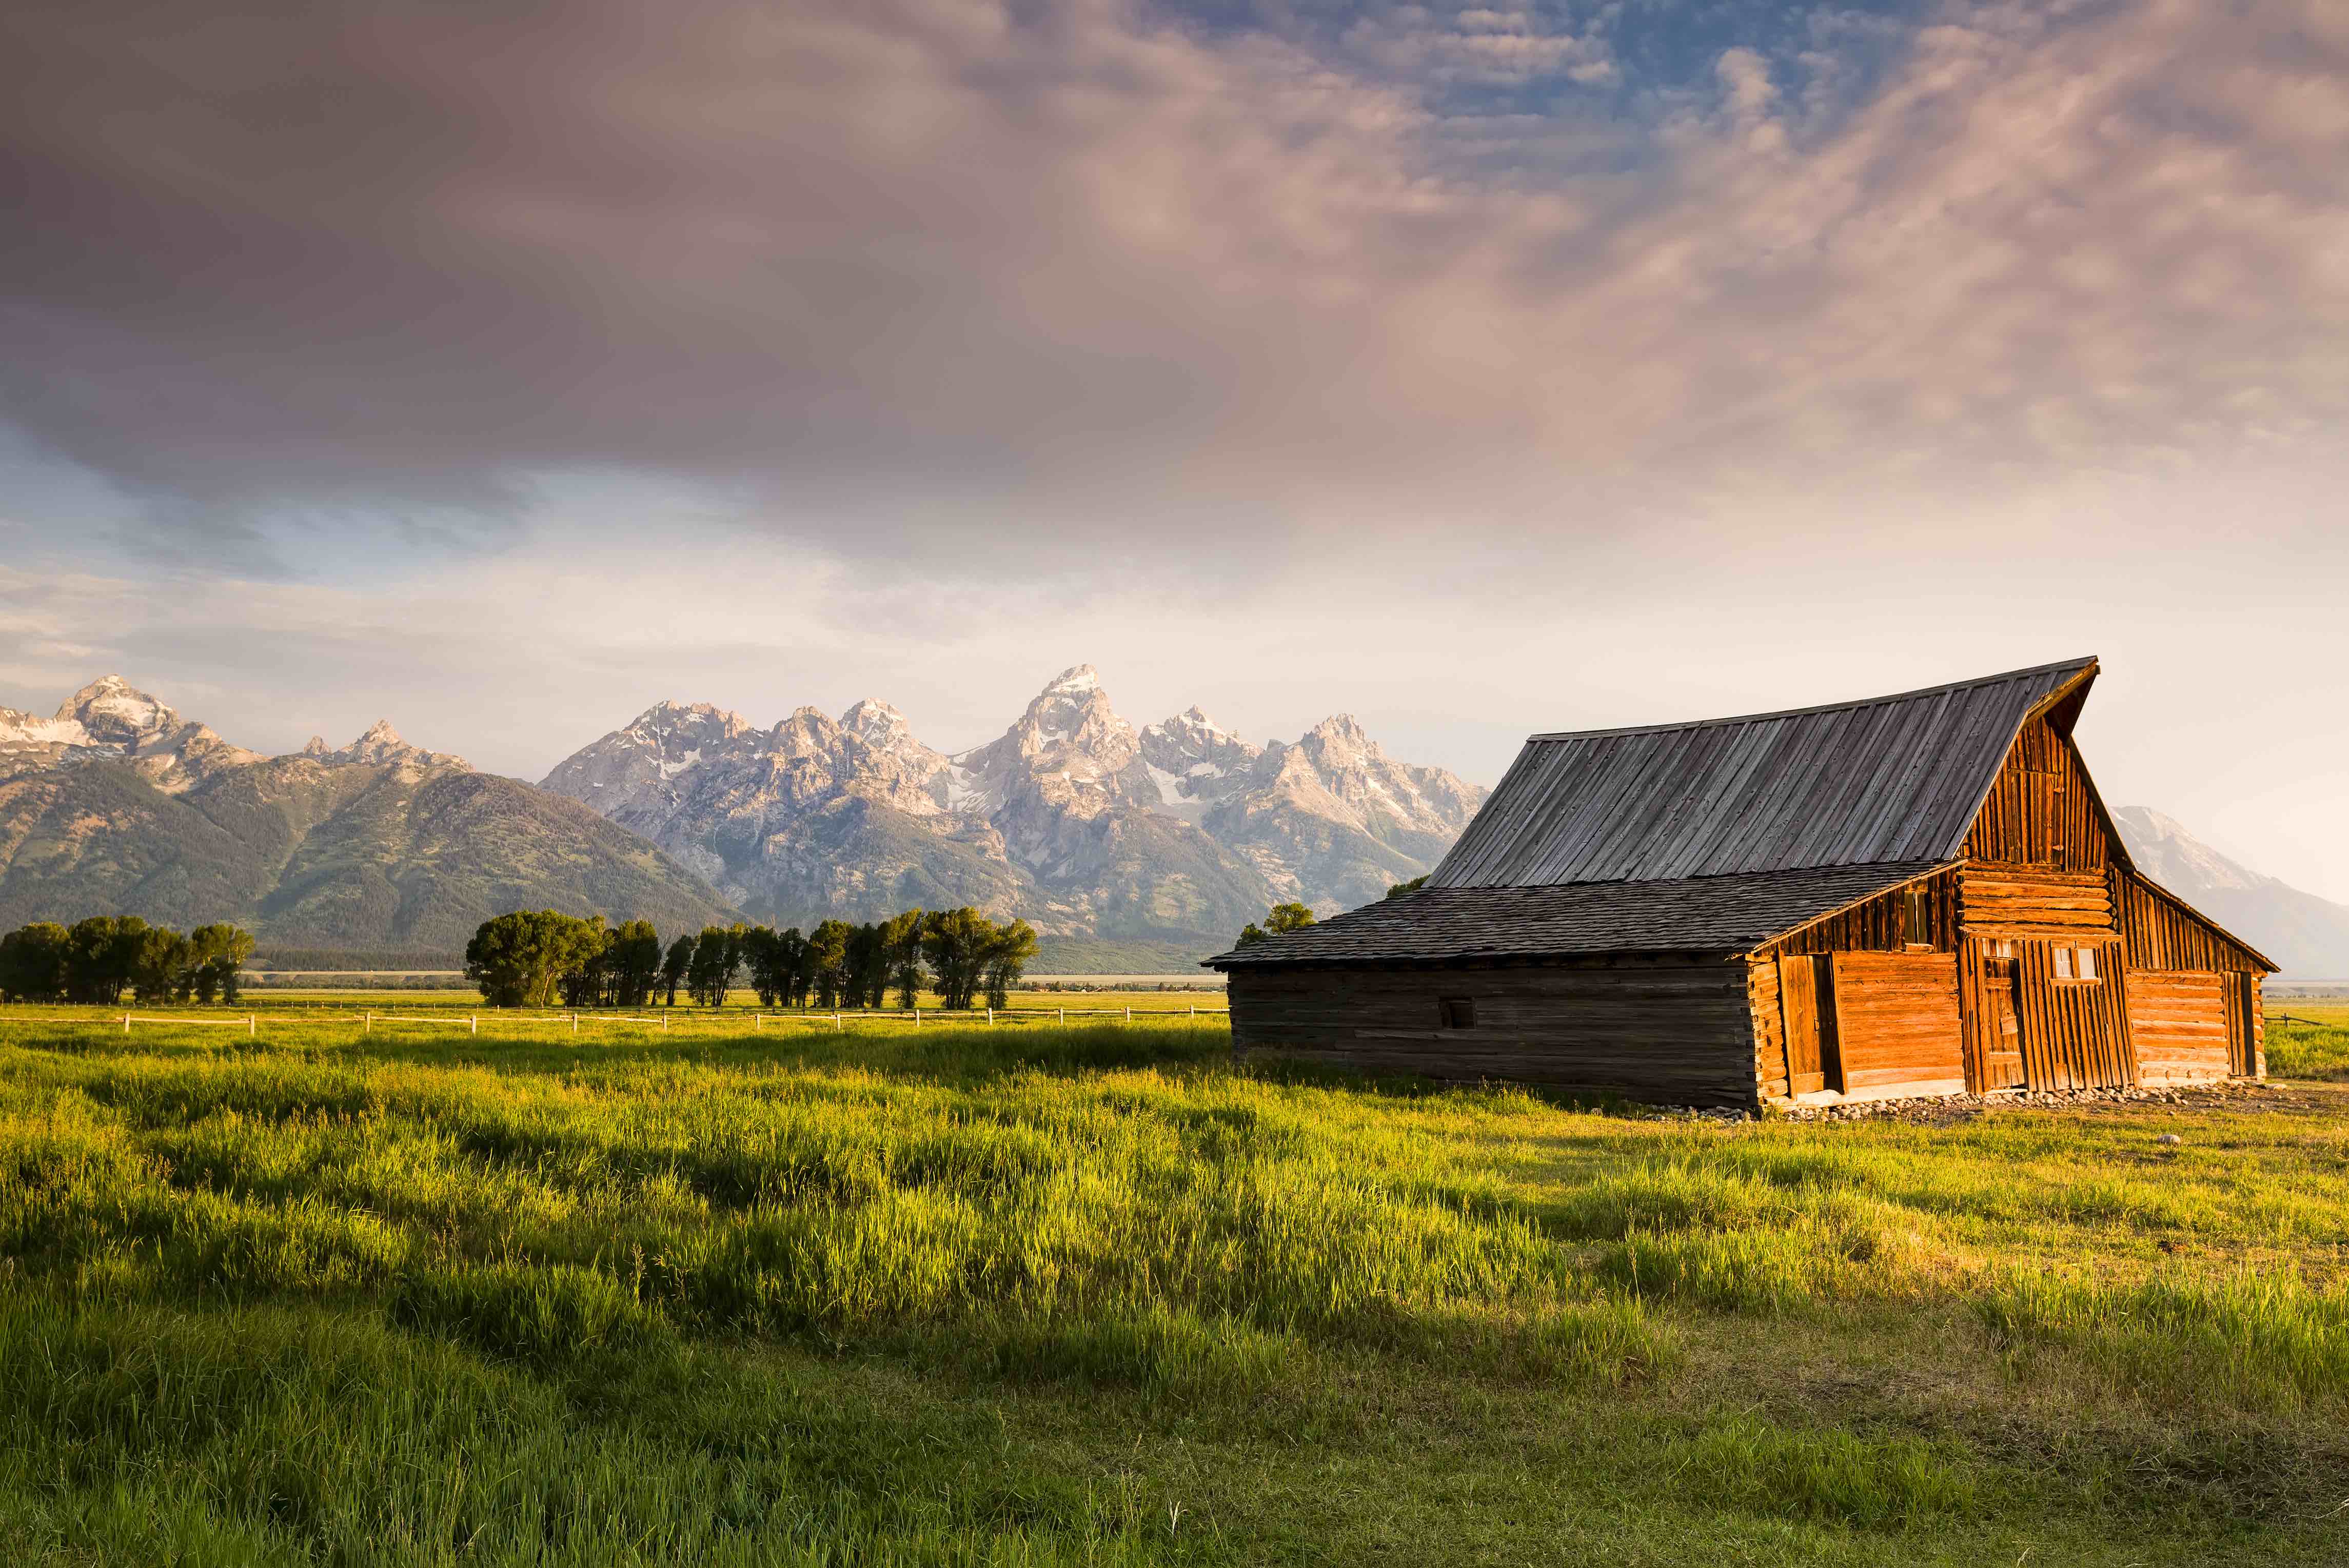 Iconic T. A. Moulton barn and Teton peaks at dawn in Grand Teton National Park, WY